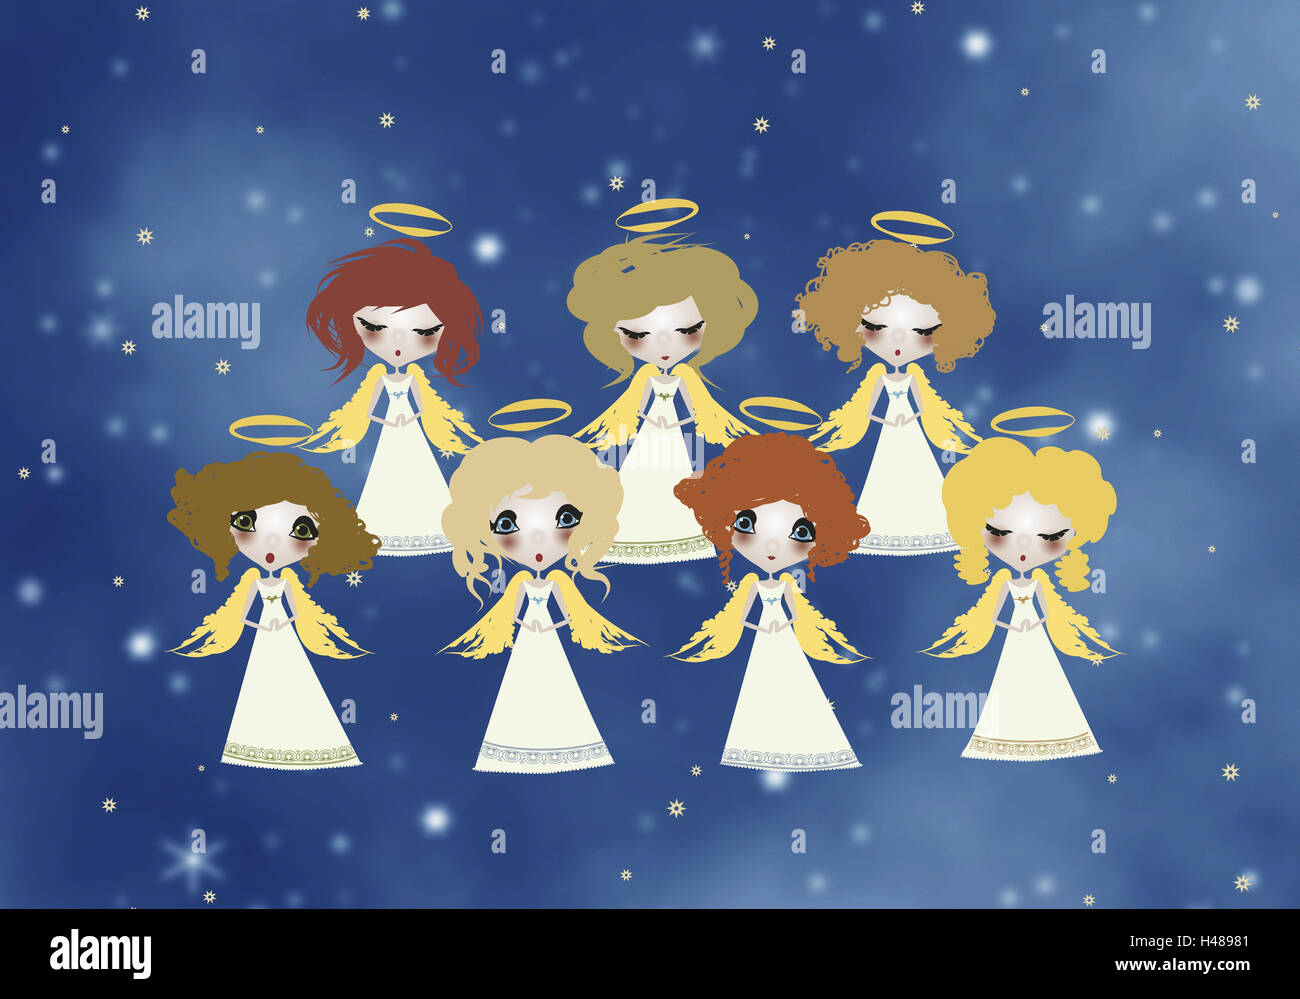 Illustration, sky, angel, seven, choir, sing, graphics, stars, celestial body, figures, little angels, for Christmas, heavenly, differently, halo, wing, fly, music, song, make music, choir of angels, group, together, together, whole body, Stock Photo